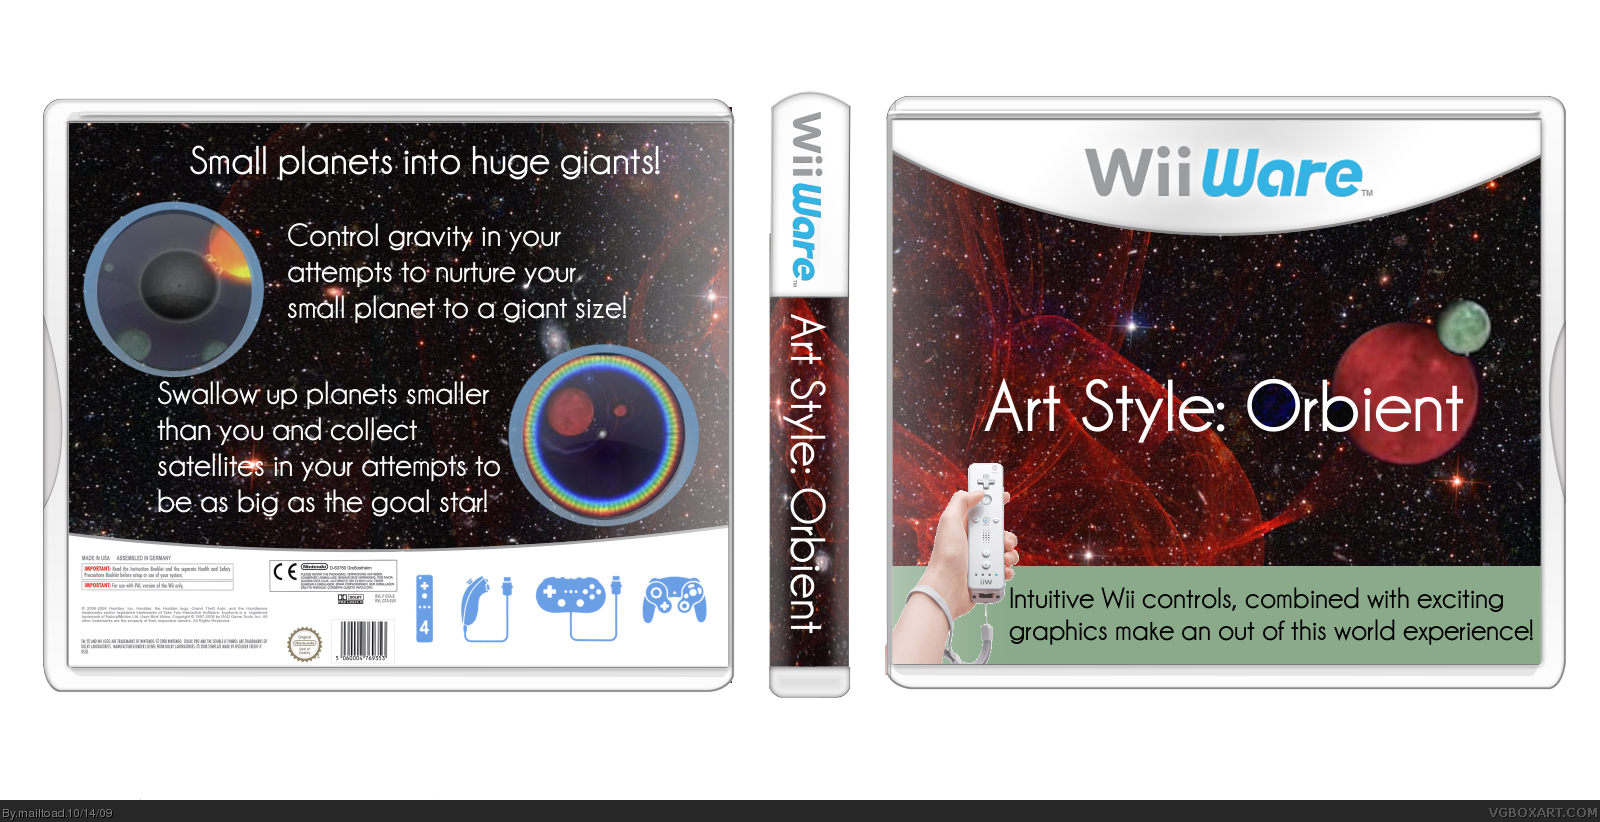 Art Style: Orbient (WiiWare) box cover